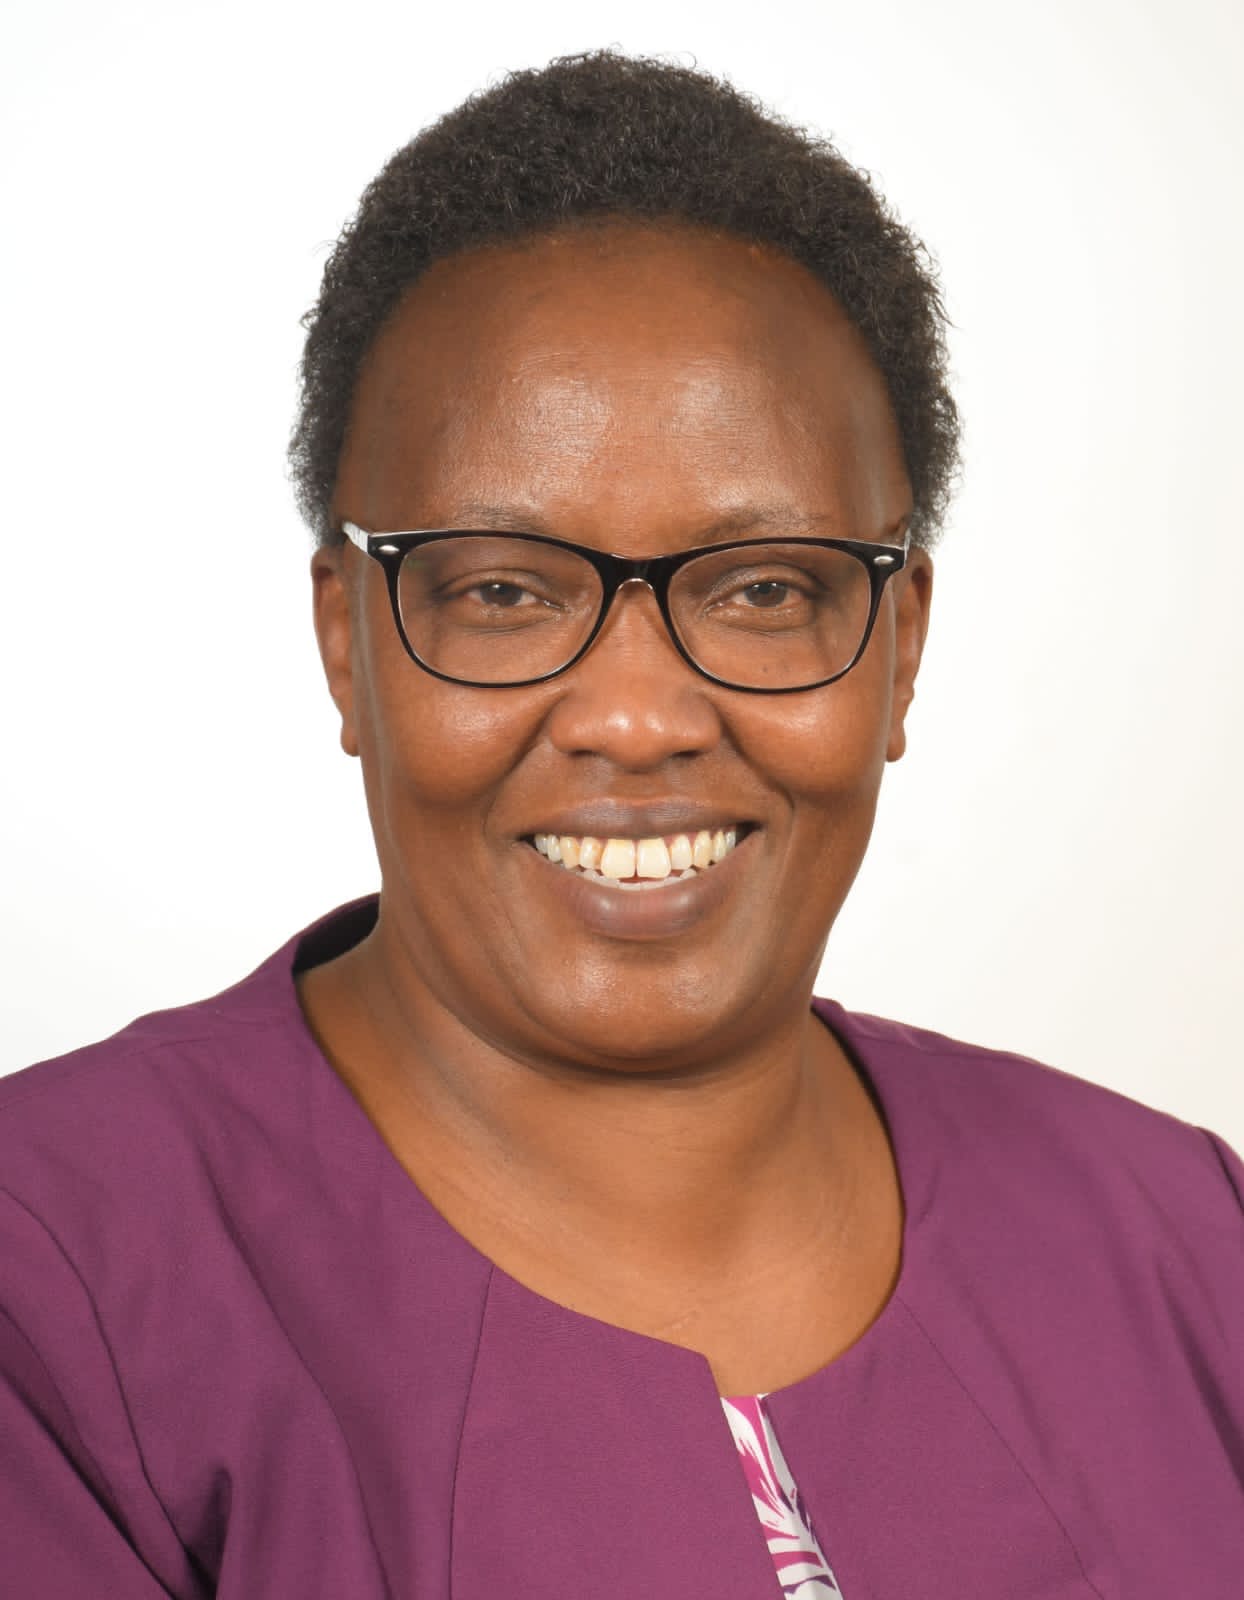 Ms. Gladys Mugambi, has been appointed as an Ex-Officio Member by Secretary-General António Guterres to lead efforts in combatting malnutrition.